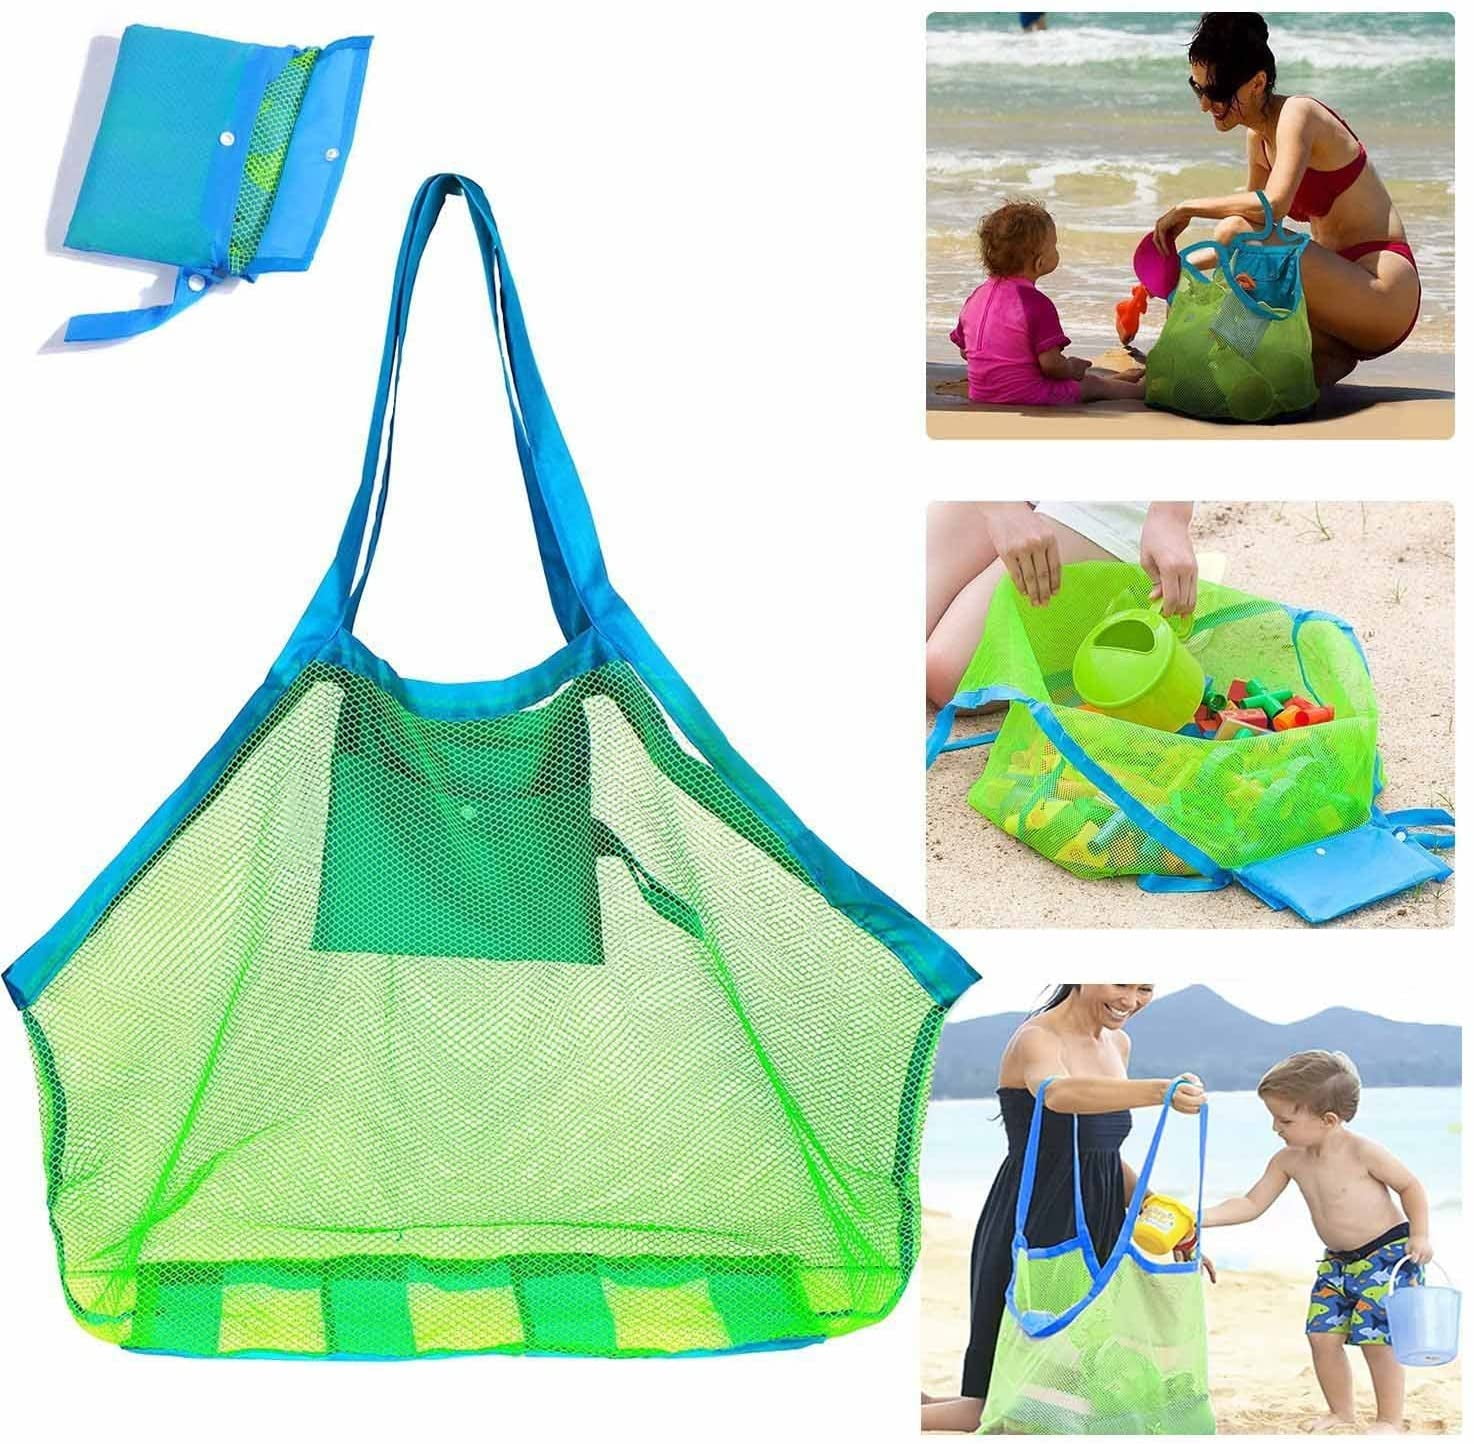 HI-QUAL 2 Pack Mesh Beach Bag Tote,Sand Beach Toy Bag,Reusable Toys Storage Bag Large Pool Bag,Durable Beach Backpack for Holding Childrens Toys,Swimming Equipment Storage & Other Beach Items Large